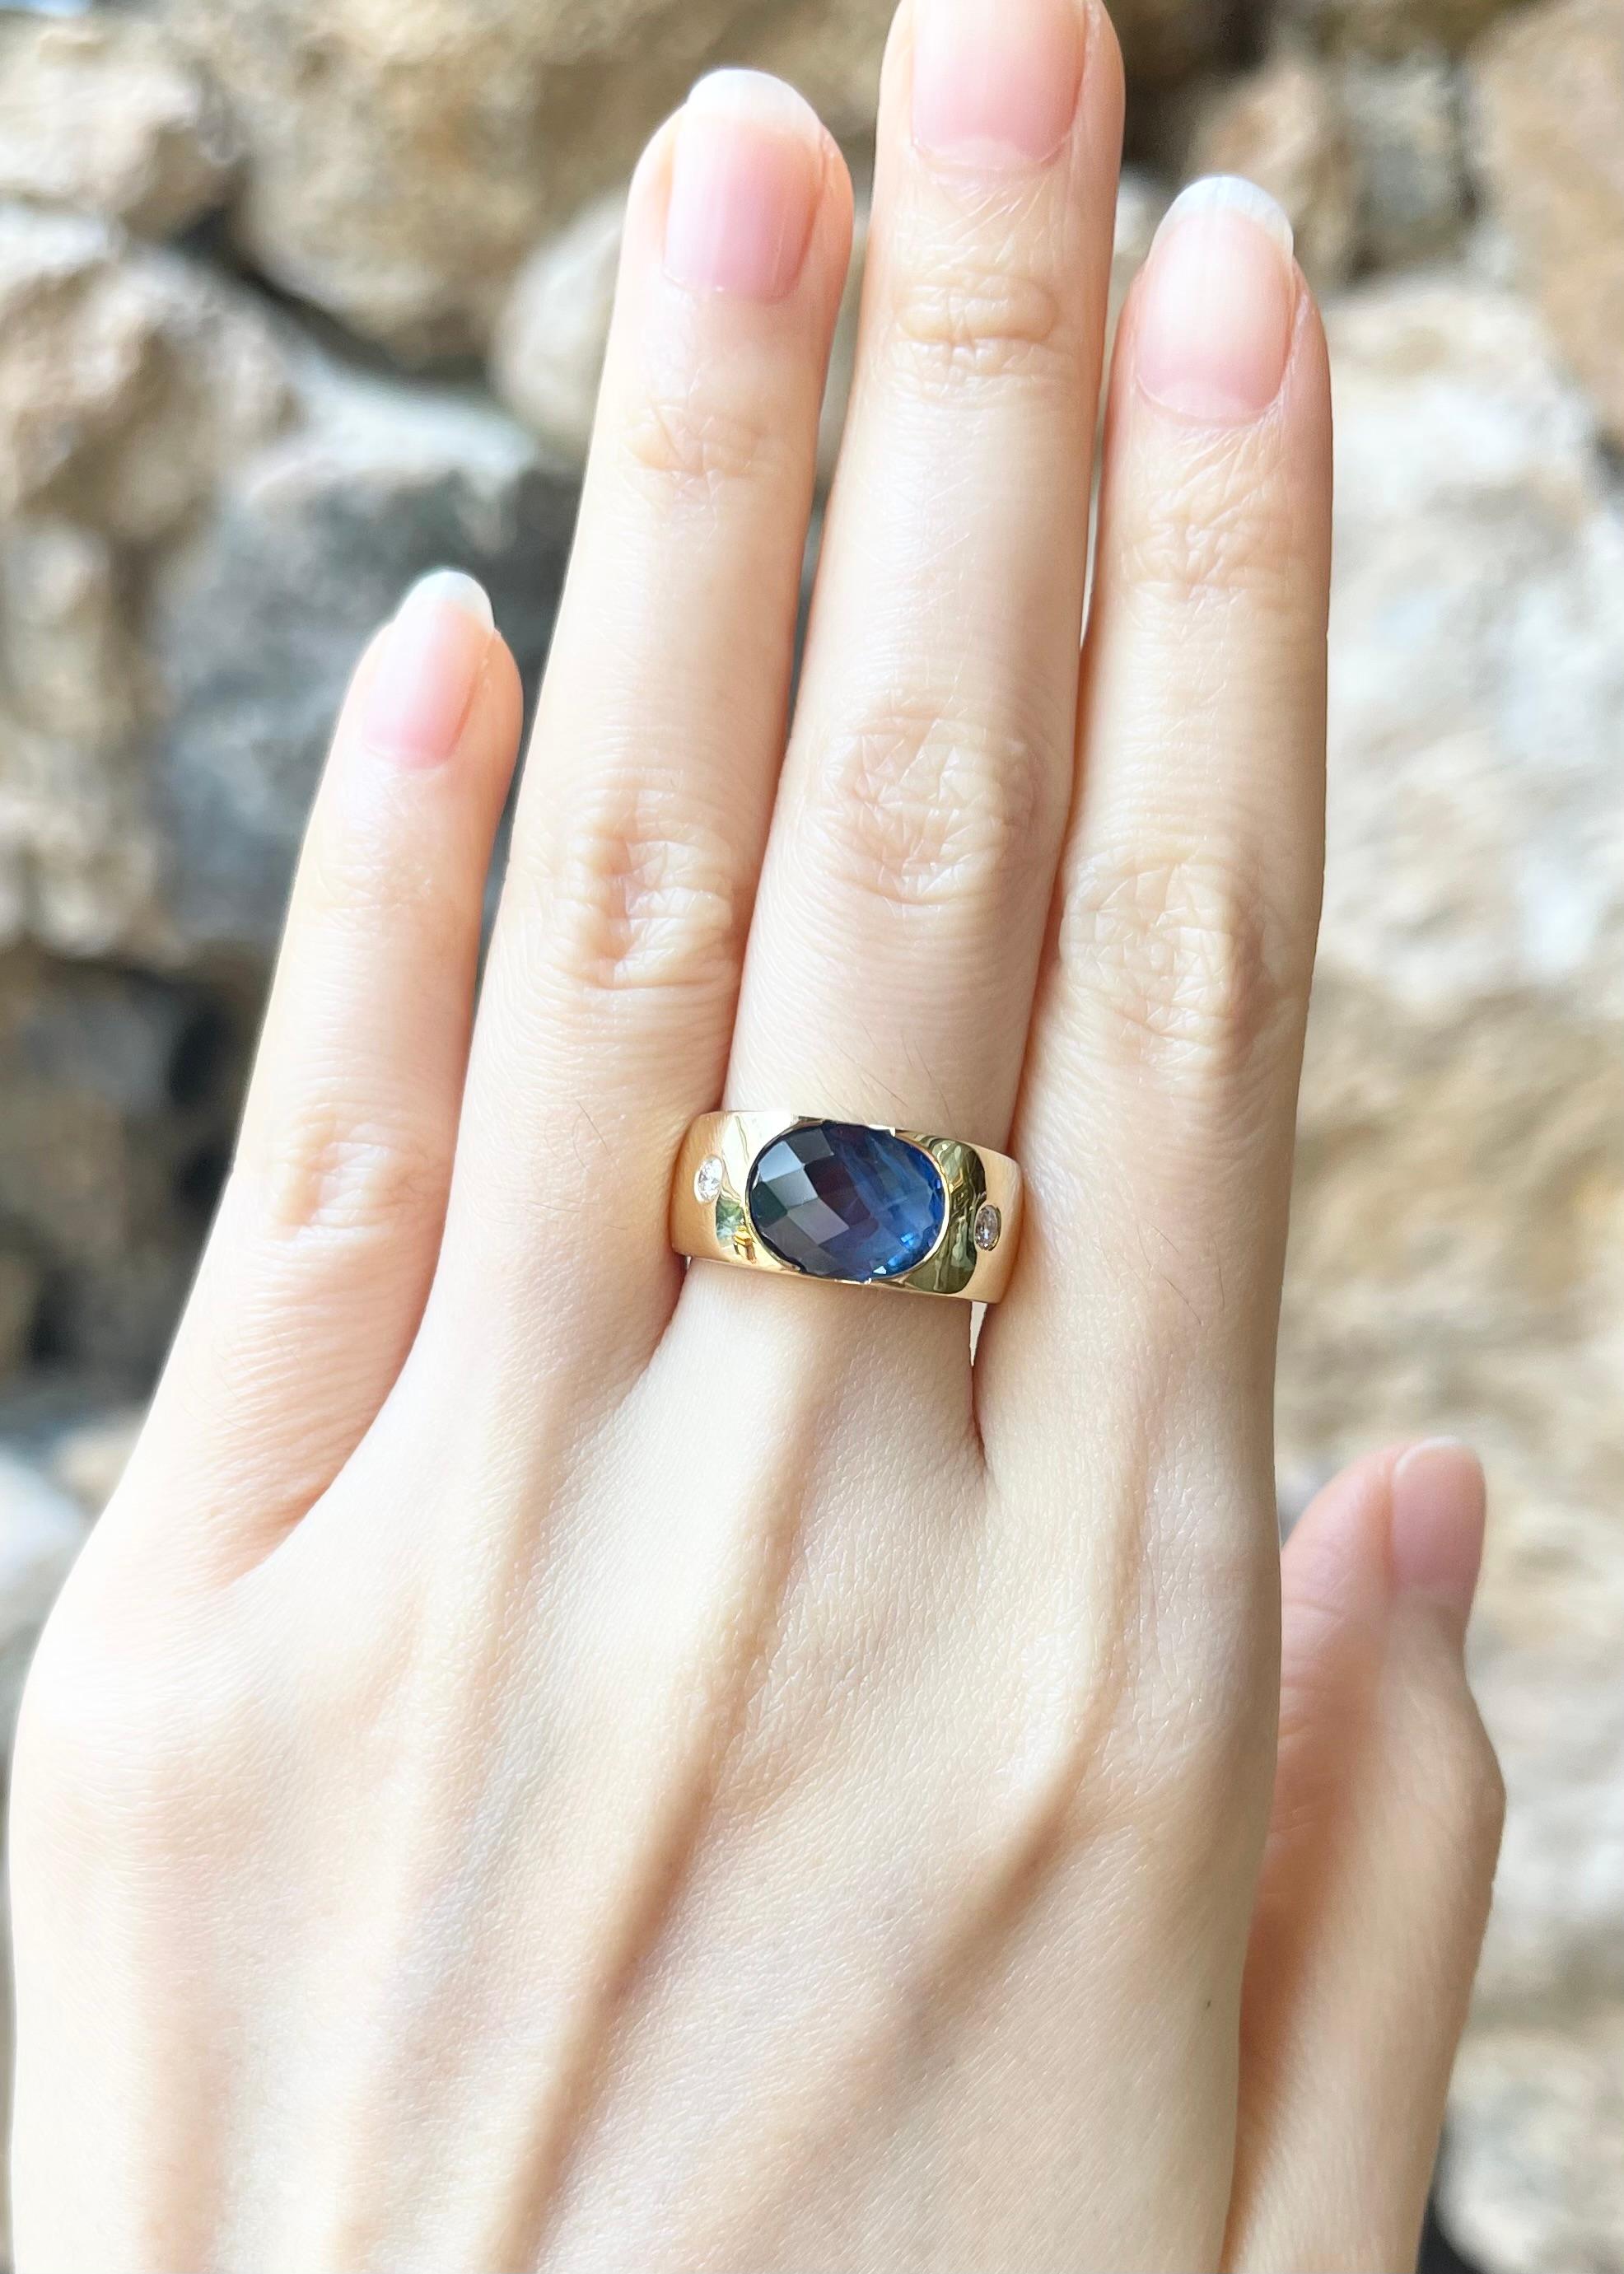 Blue Sapphire 3.16 carats with Diamond 0.13 carat Ring set in 18K Gold Settings

Width:  1.1 cm 
Length: 0.8 cm
Ring Size: 54
Total Weight: 11.44 grams

